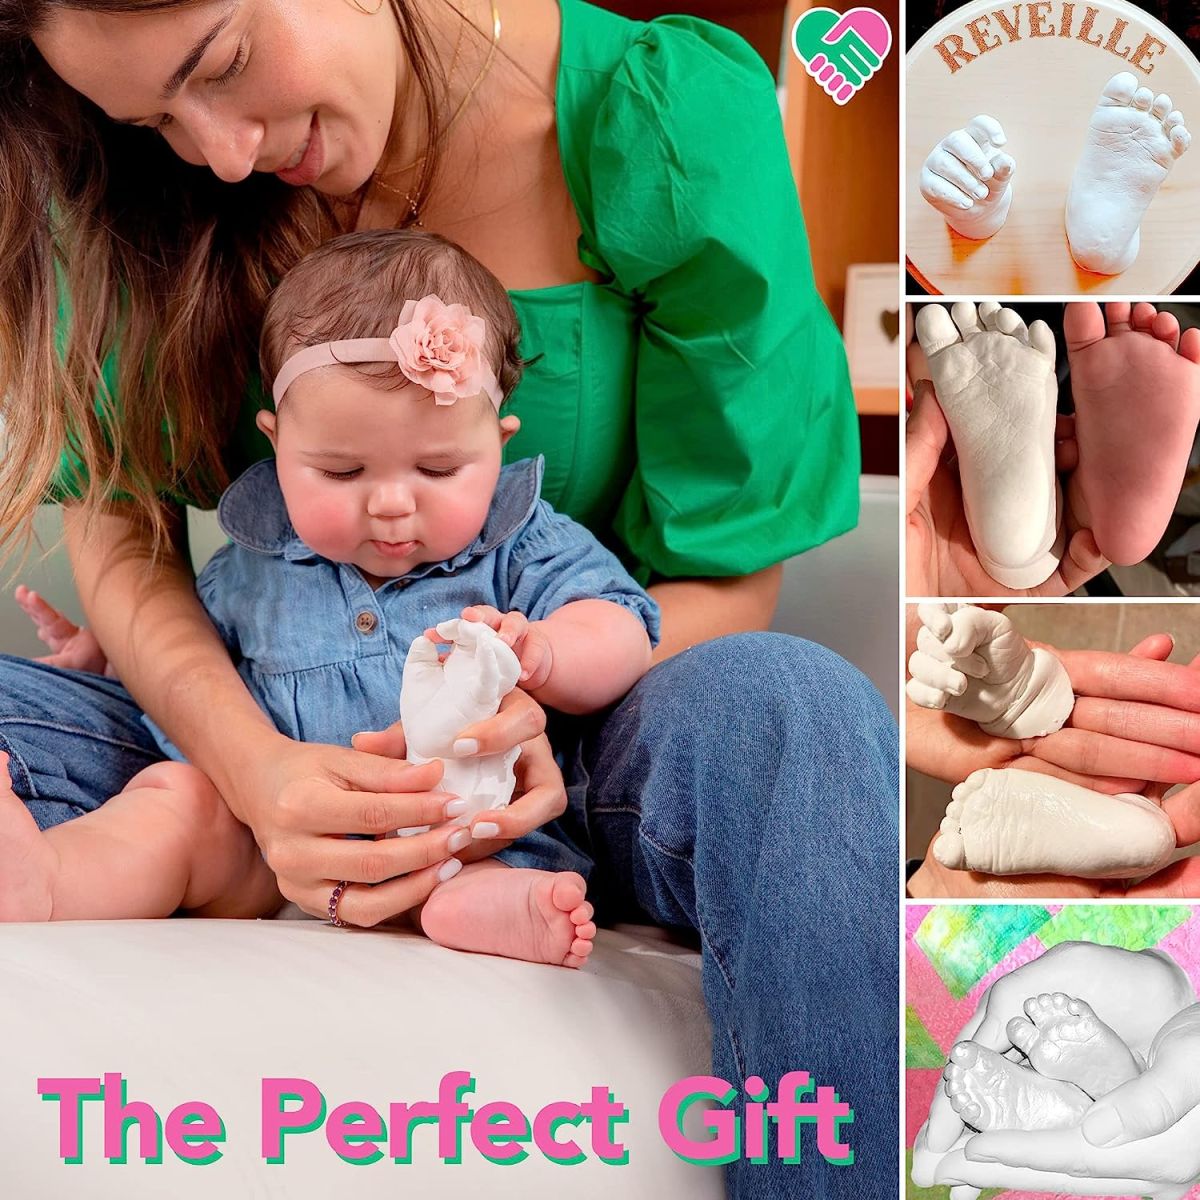 Luna Bean Baby Keepsake Foot & Hand Casting Kit - Mold Casting Kit - First Mothers Day Gifts DIY, Baby Keepsake Kit Gender Neutral Baby Shower Gifts Baby Boys & Girls, Newborn Gifts Registry (Pearl)